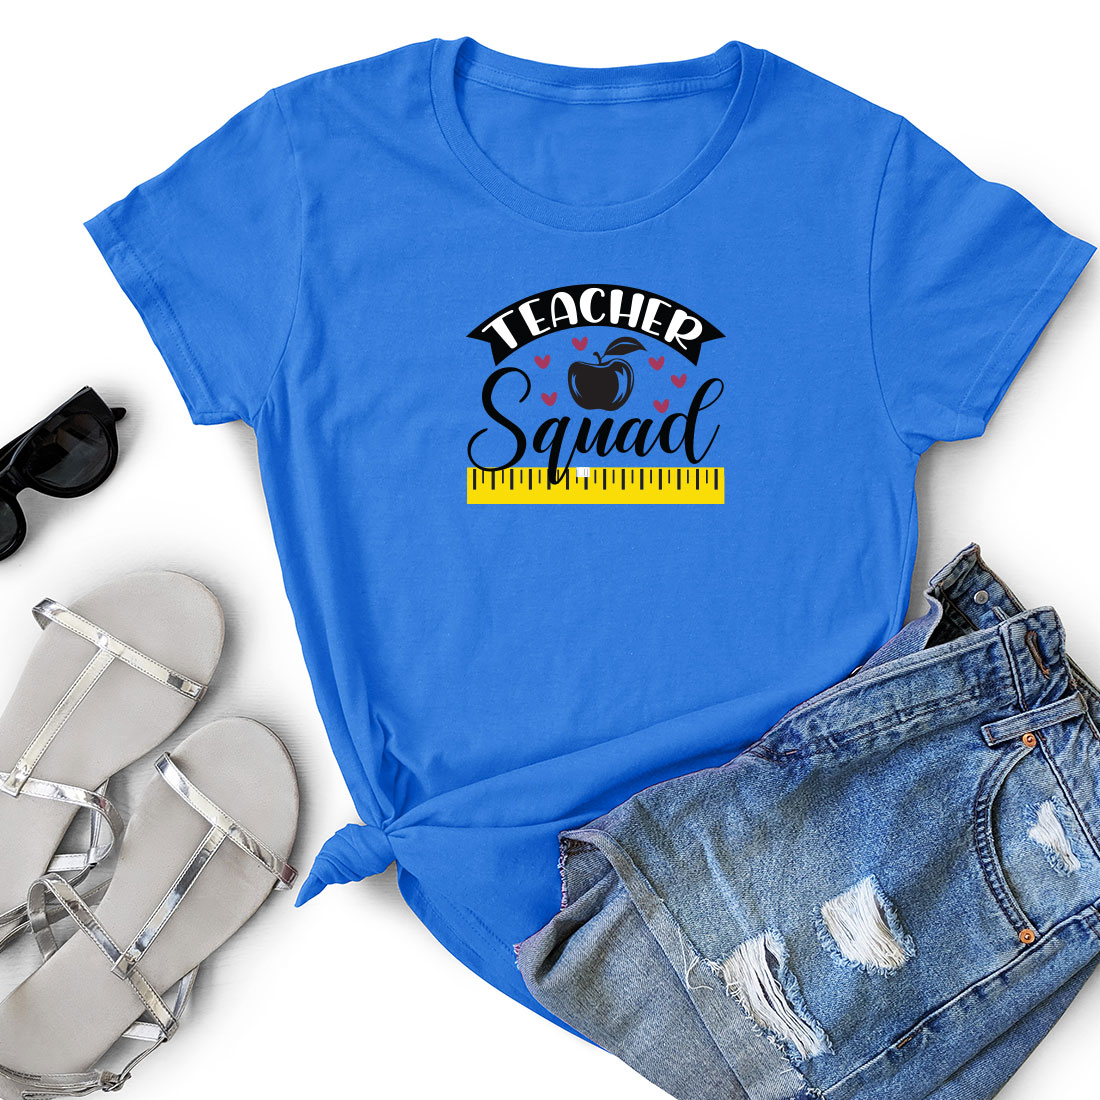 T - shirt that says teach squad next to a pair of shorts.